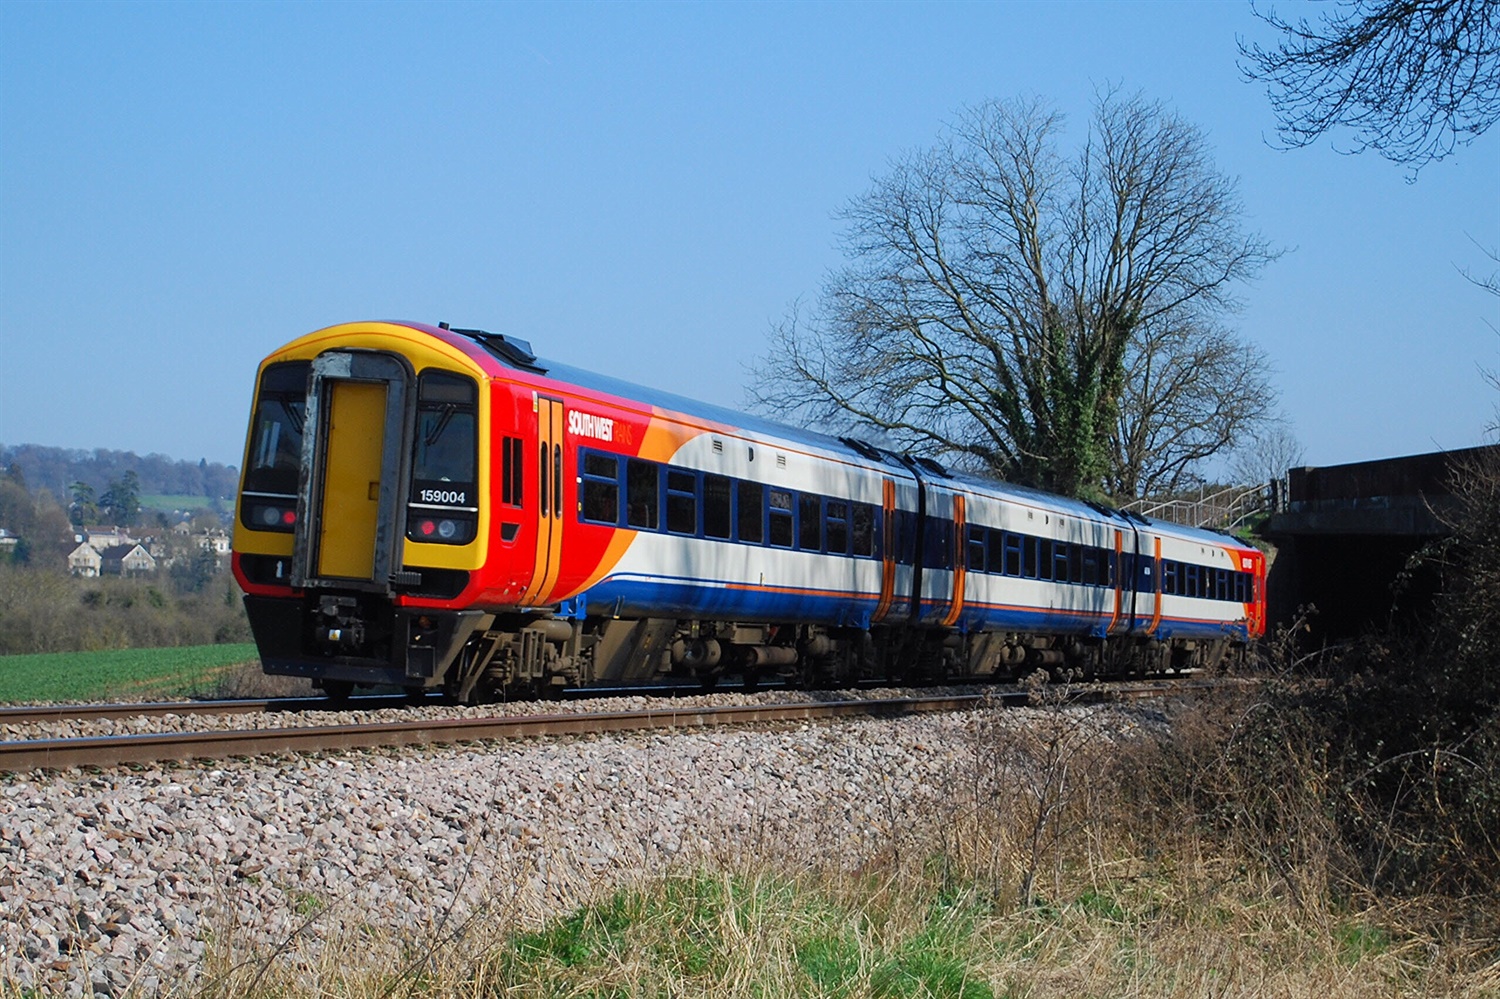 SWT adds more services and links to West of England Main Line